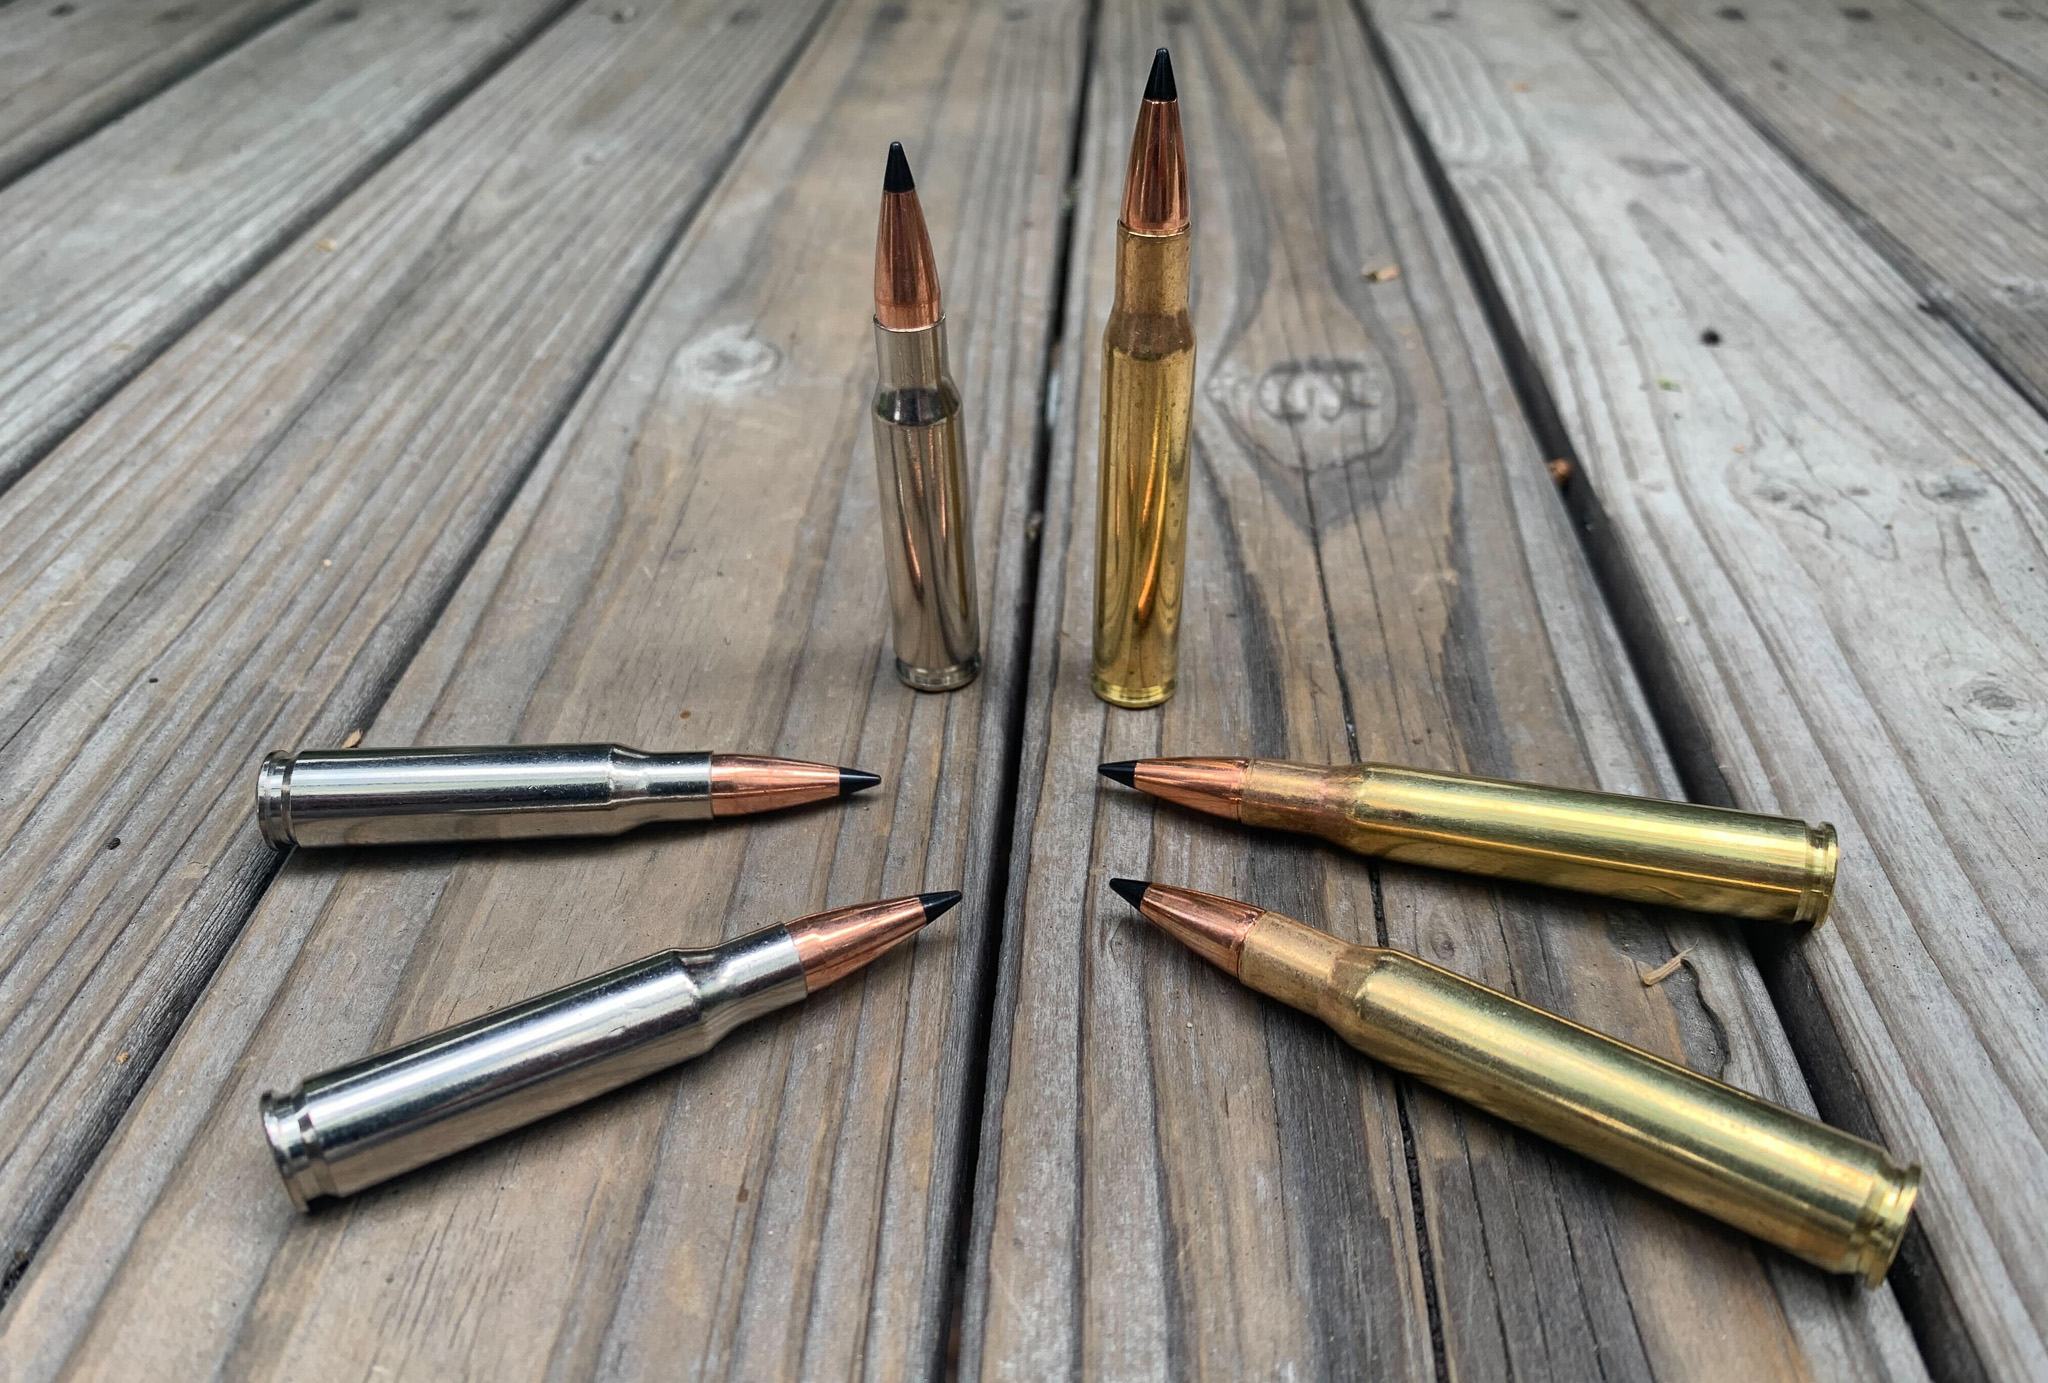 Comparing the .308 win. cartridge with the .30-06